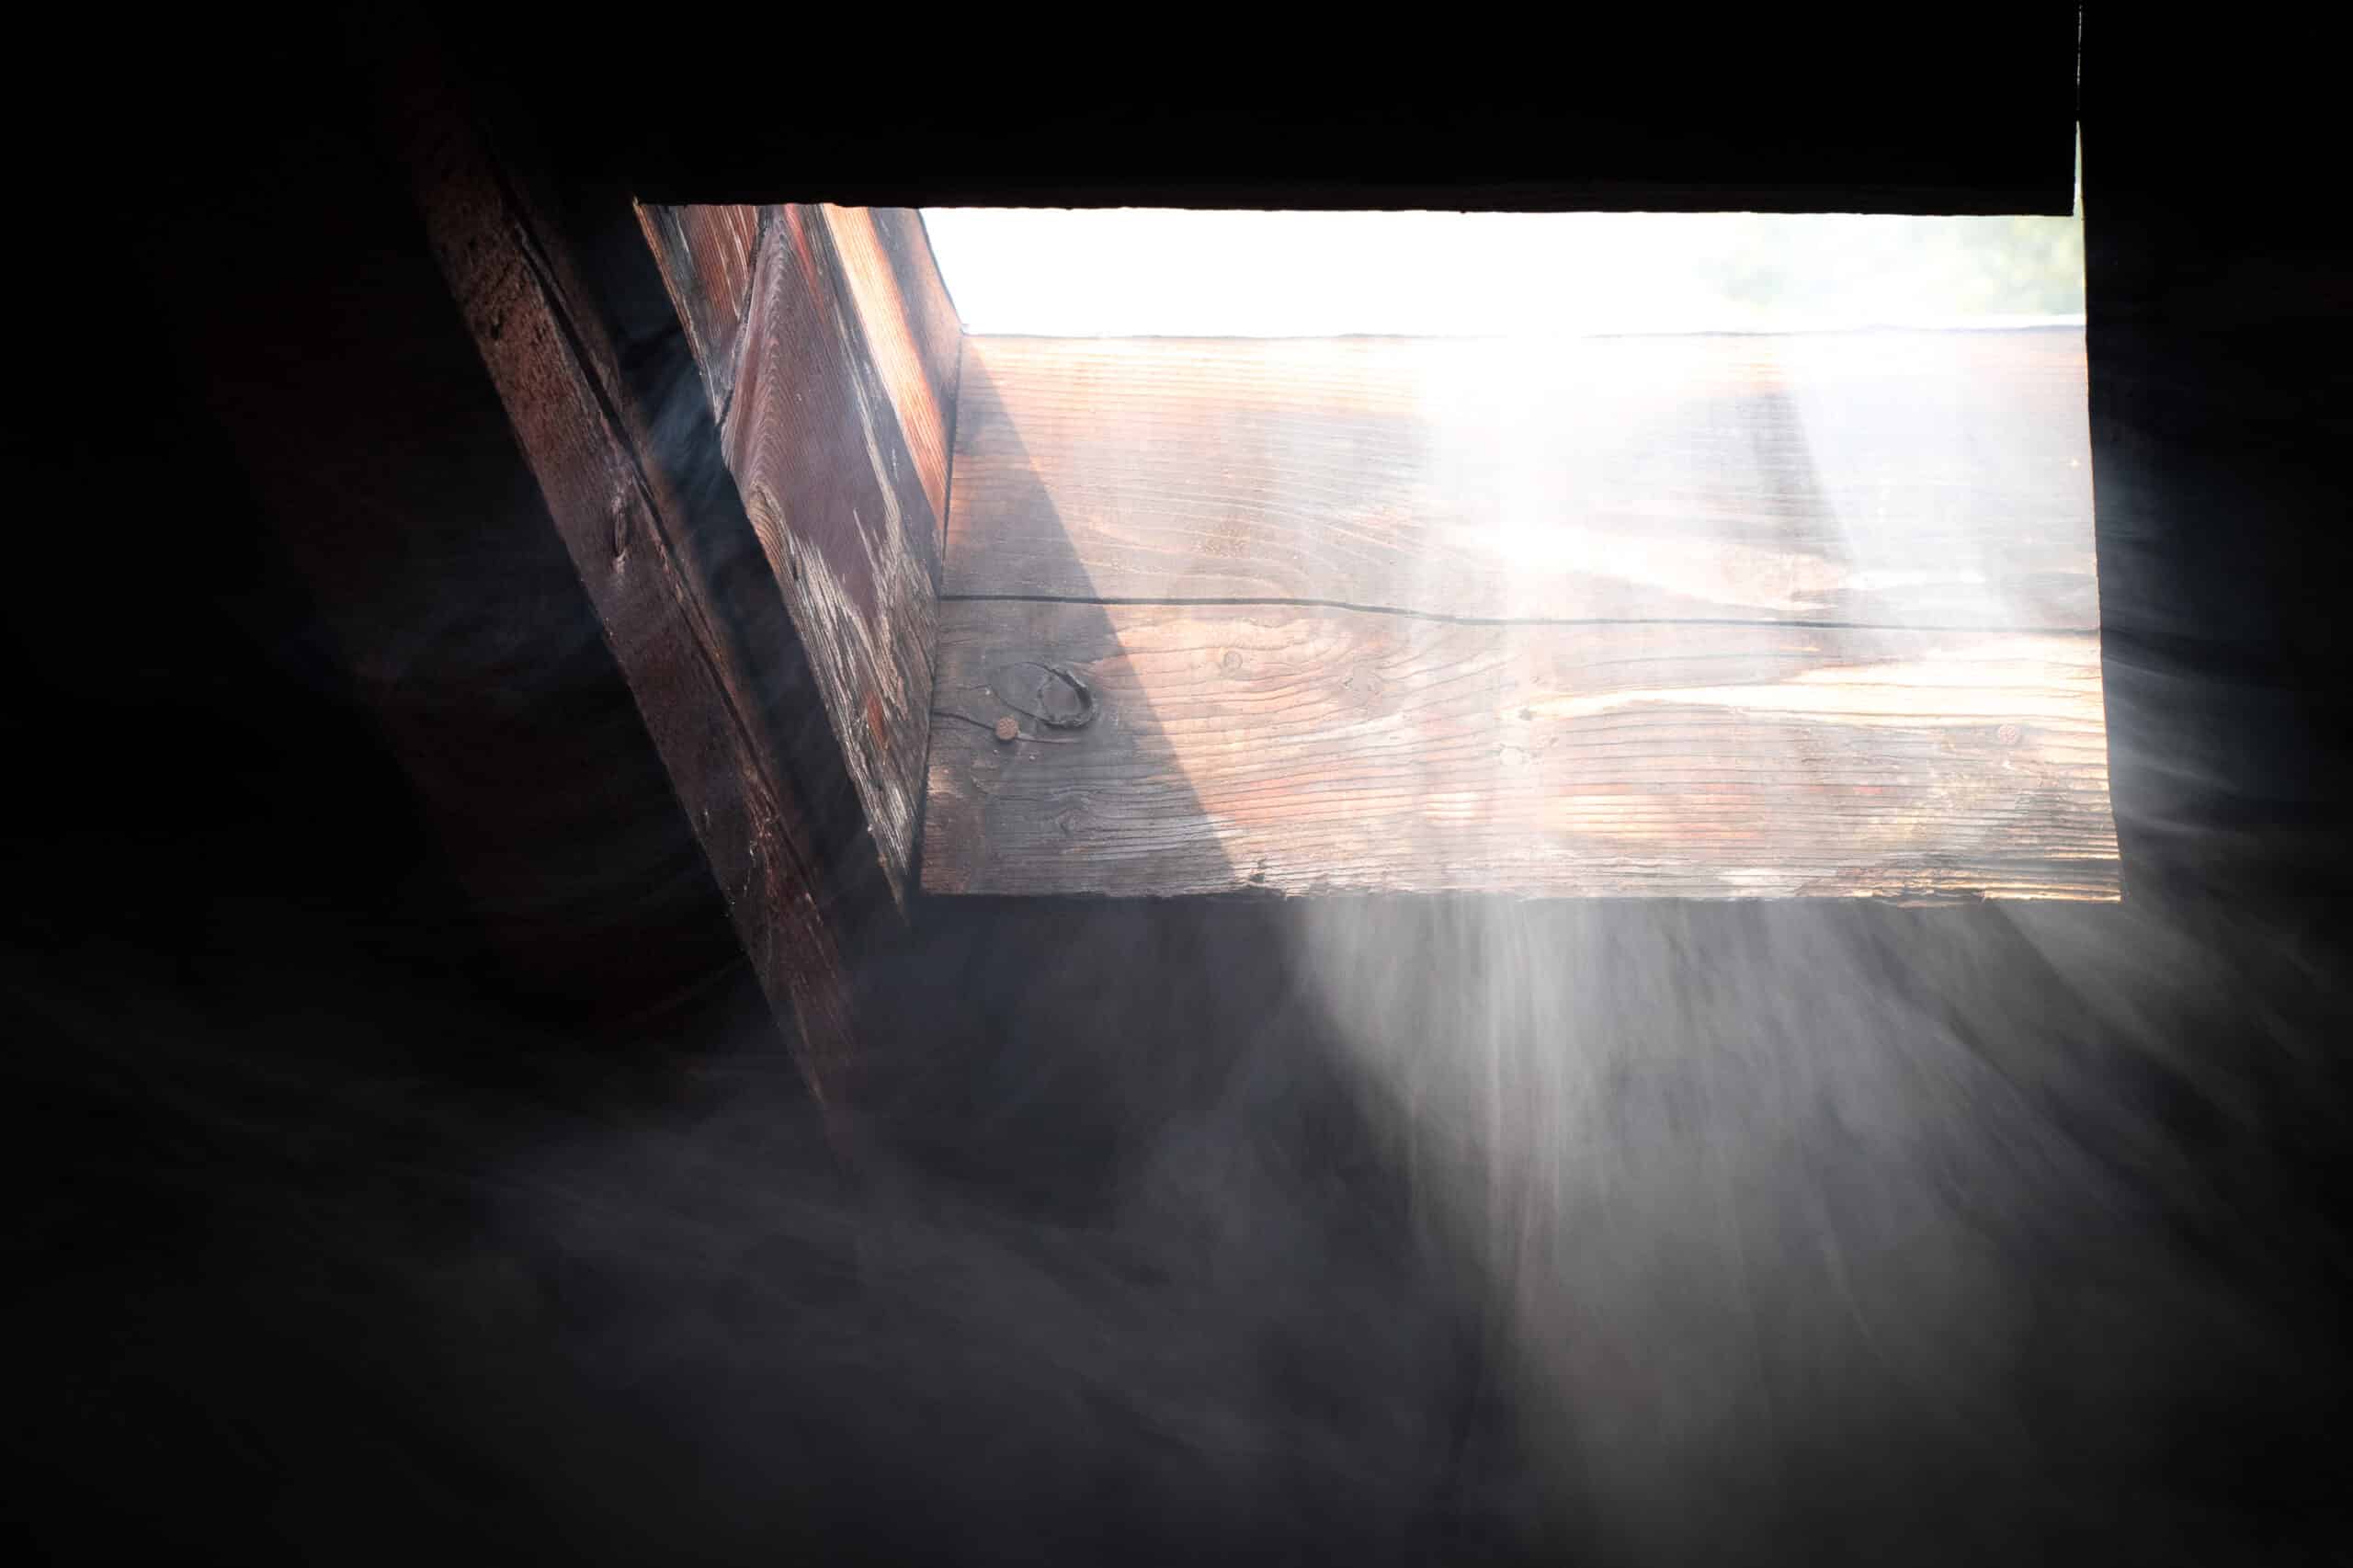 Visible flow of air through the attic window